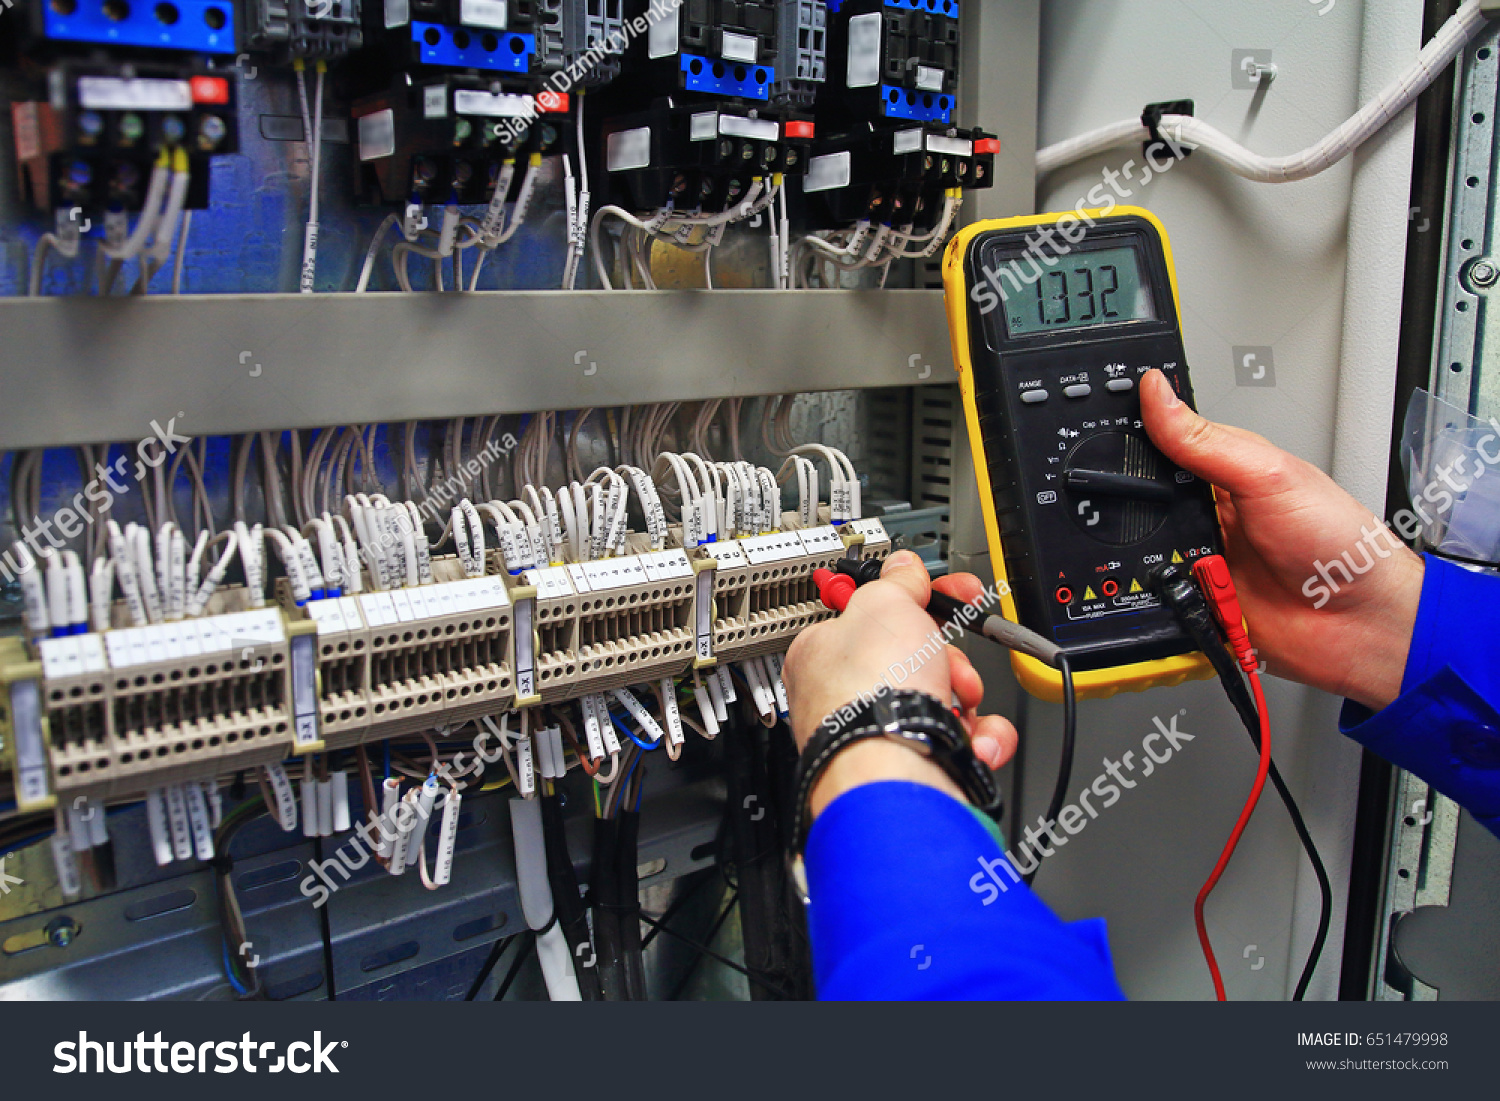 engineer tests the industrial electrical circuits with a multimeter in the control terminal box. Engineer's hands with a multimeter close-up against background of terminal rows of automation panel. #651479998